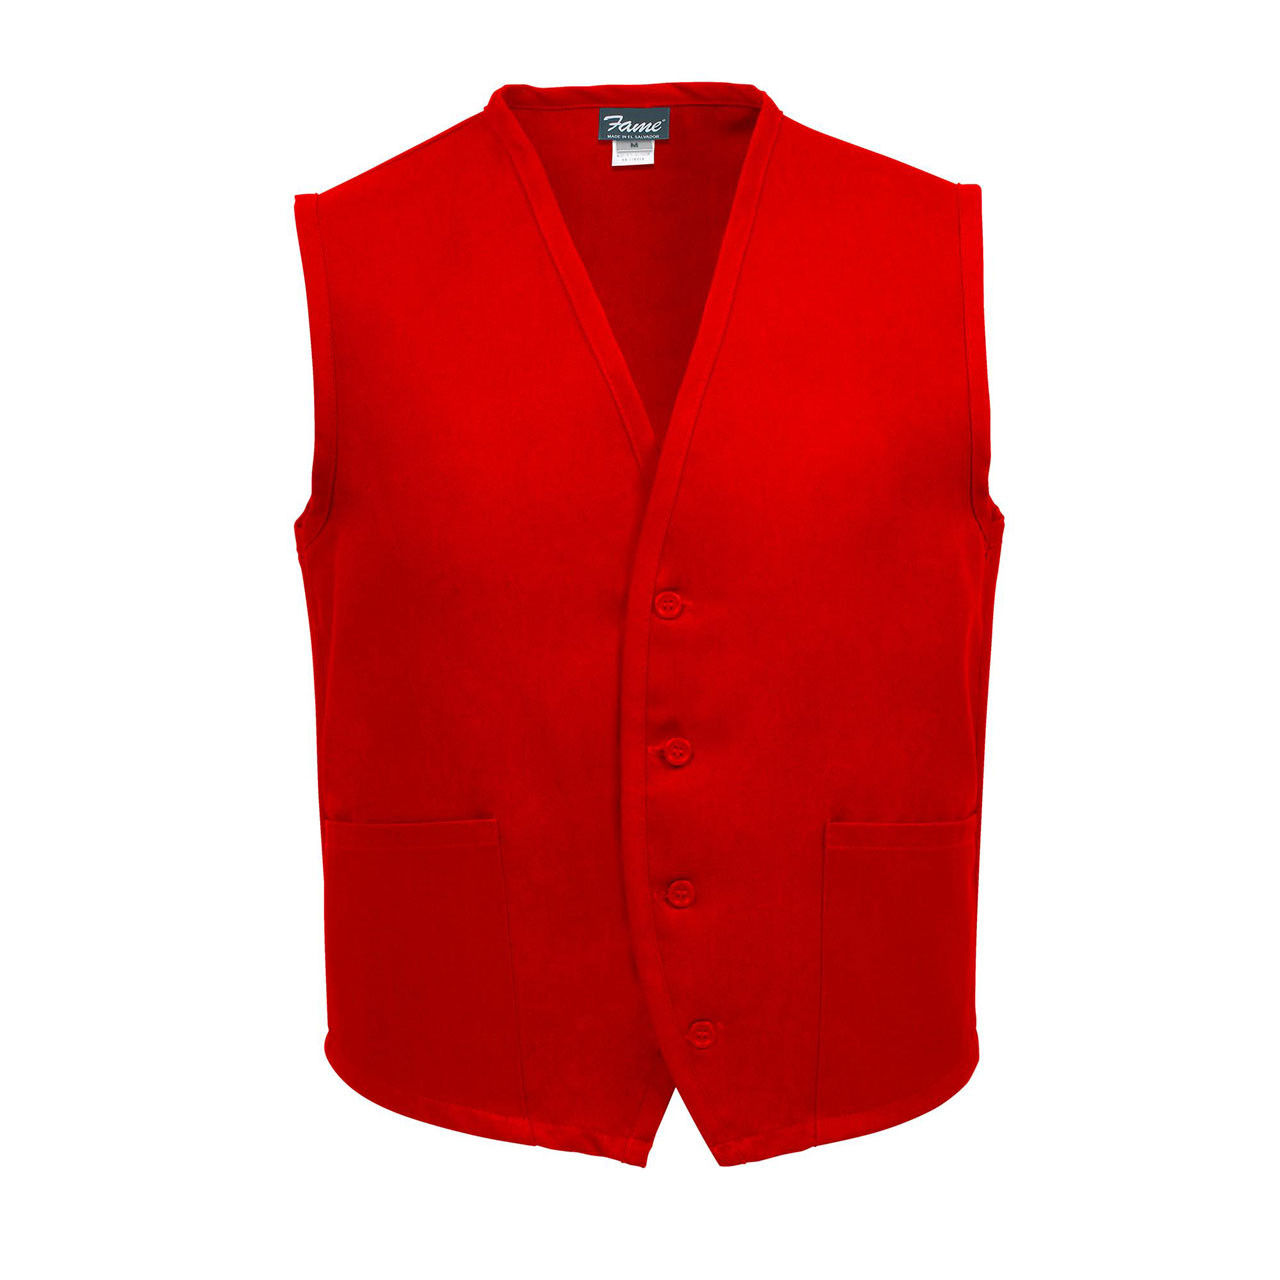 What are the characteristics of the red vest, the Unisex Uniform Vest, 2 Pocket?